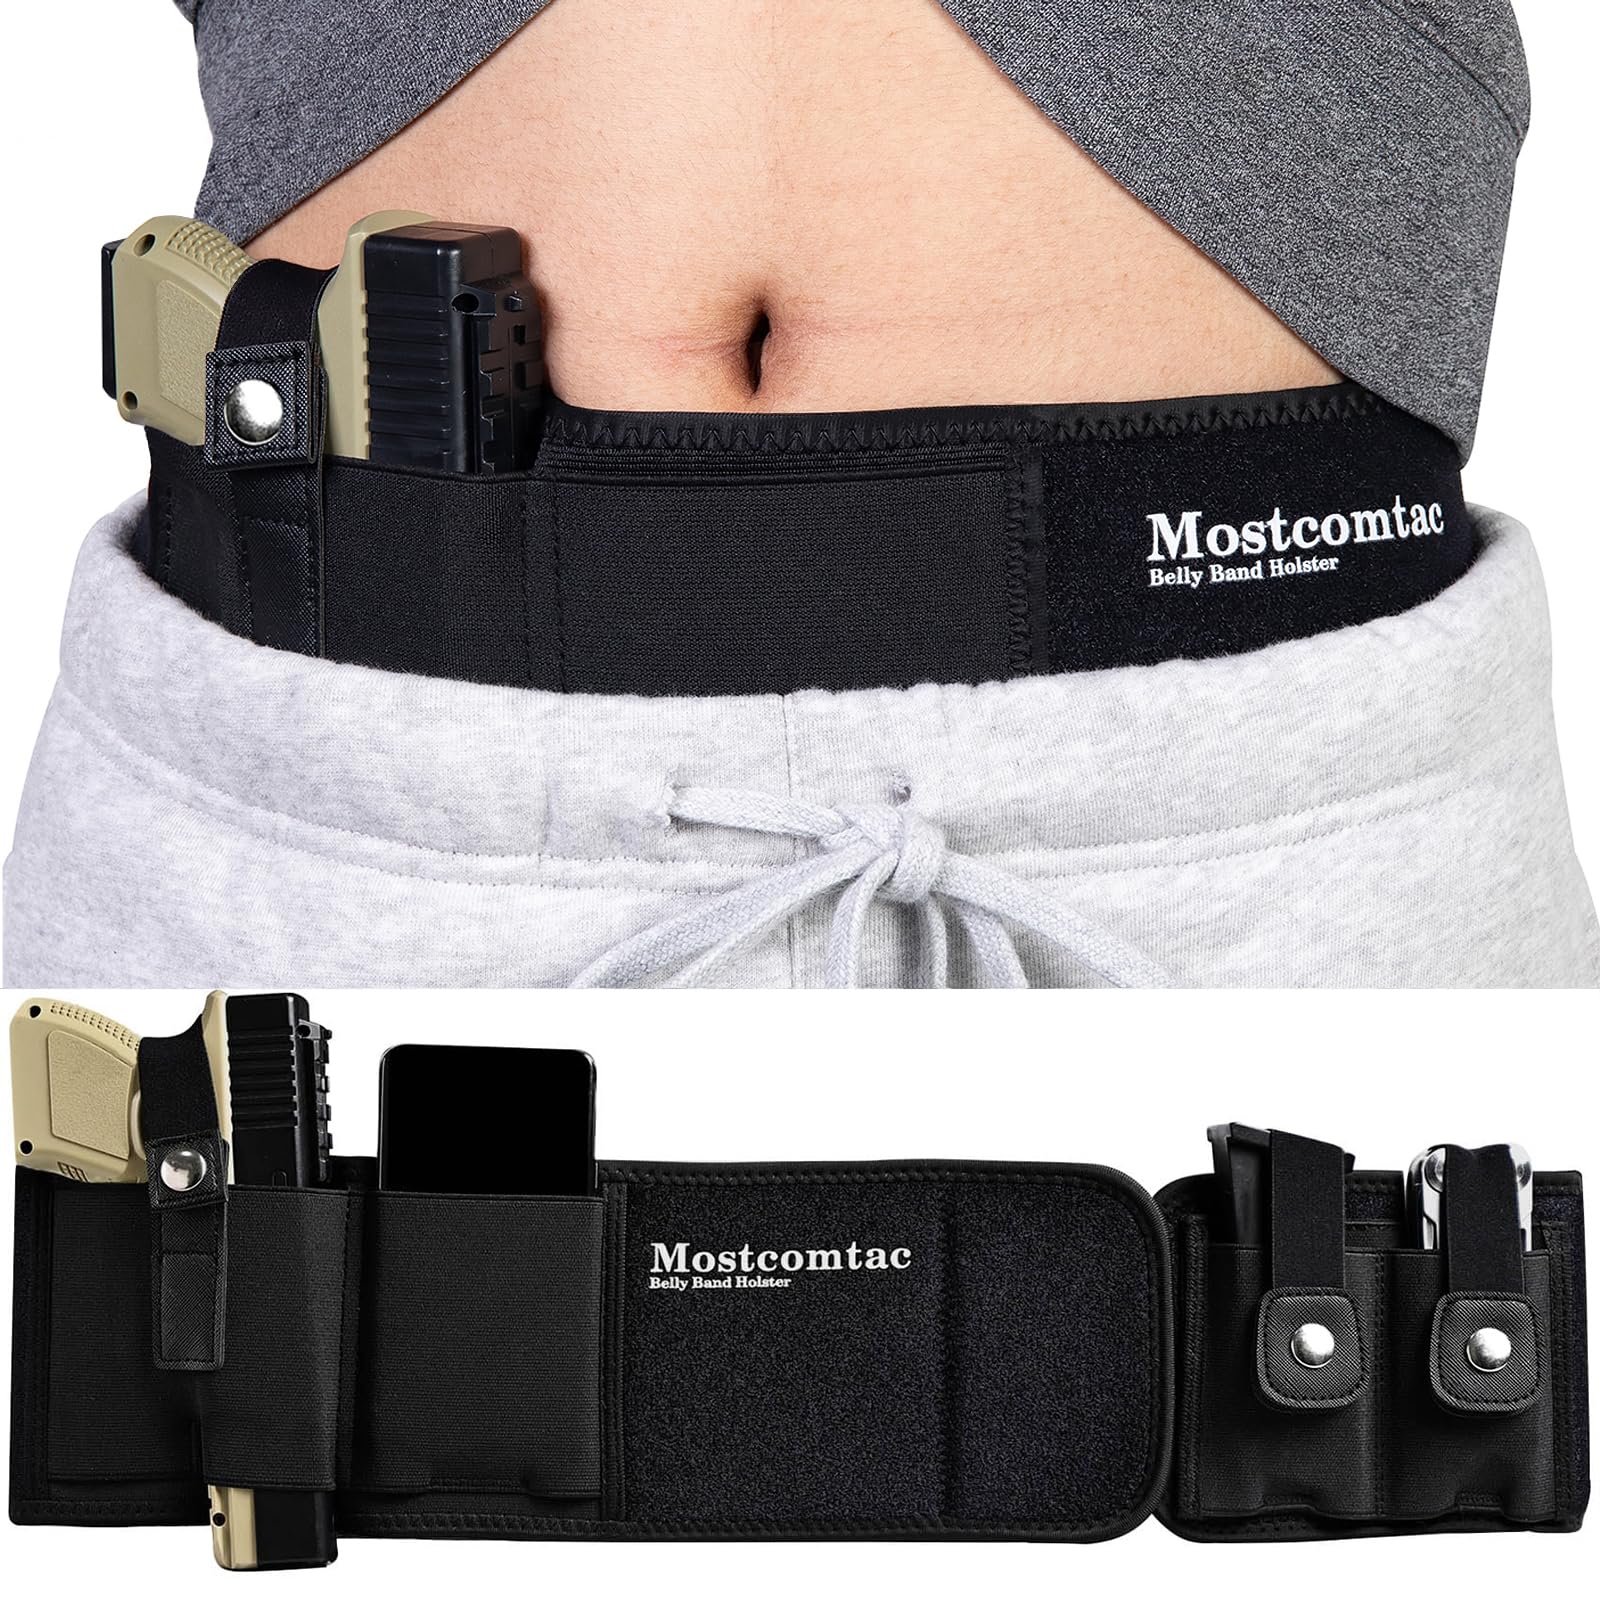 Mostcomtac Belly Band Holster for Concealed Carry - Gun Holsters for Men Women, Waist Holster for Pistols, Fit Glock, Ruger Lcp, S&W M&P 40 Shield Bodyguard, Sig Sauer, Beretta, 1911, Etc(Black S)